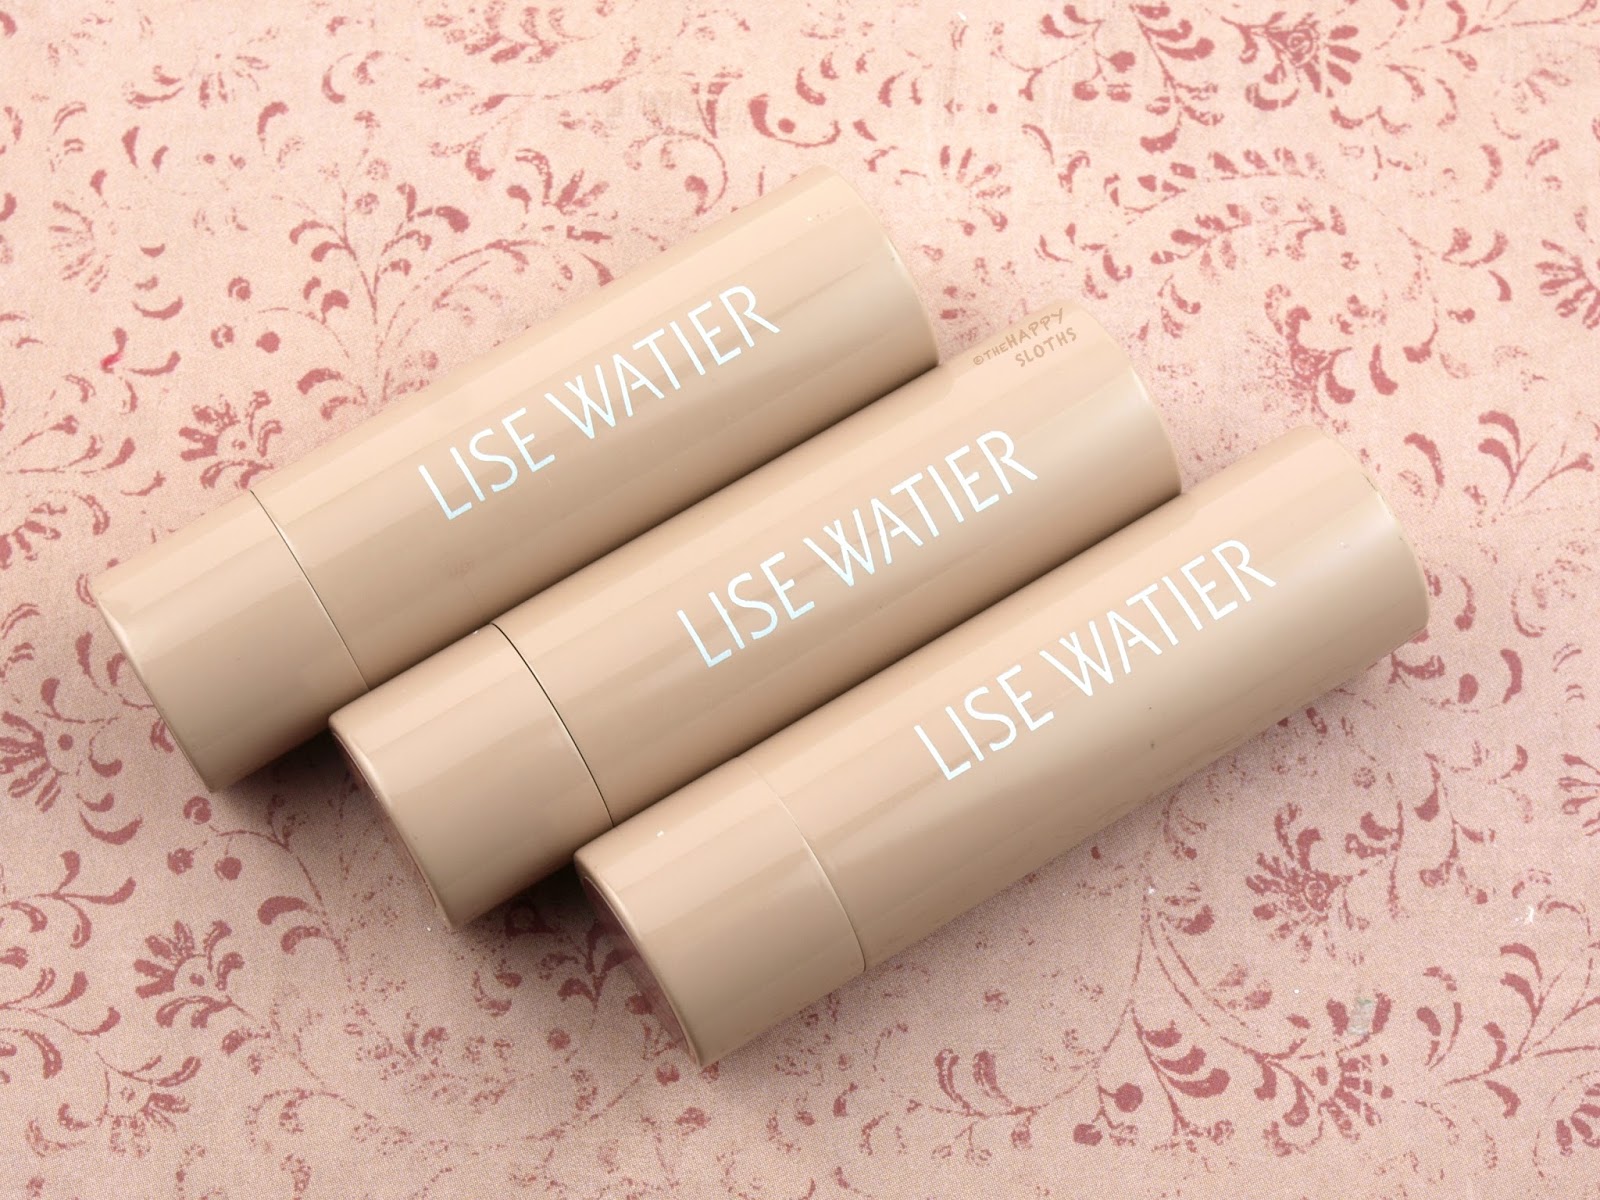 Lise Watier Rouge Gourmand The Nudes Lipstick: Review and Swatches